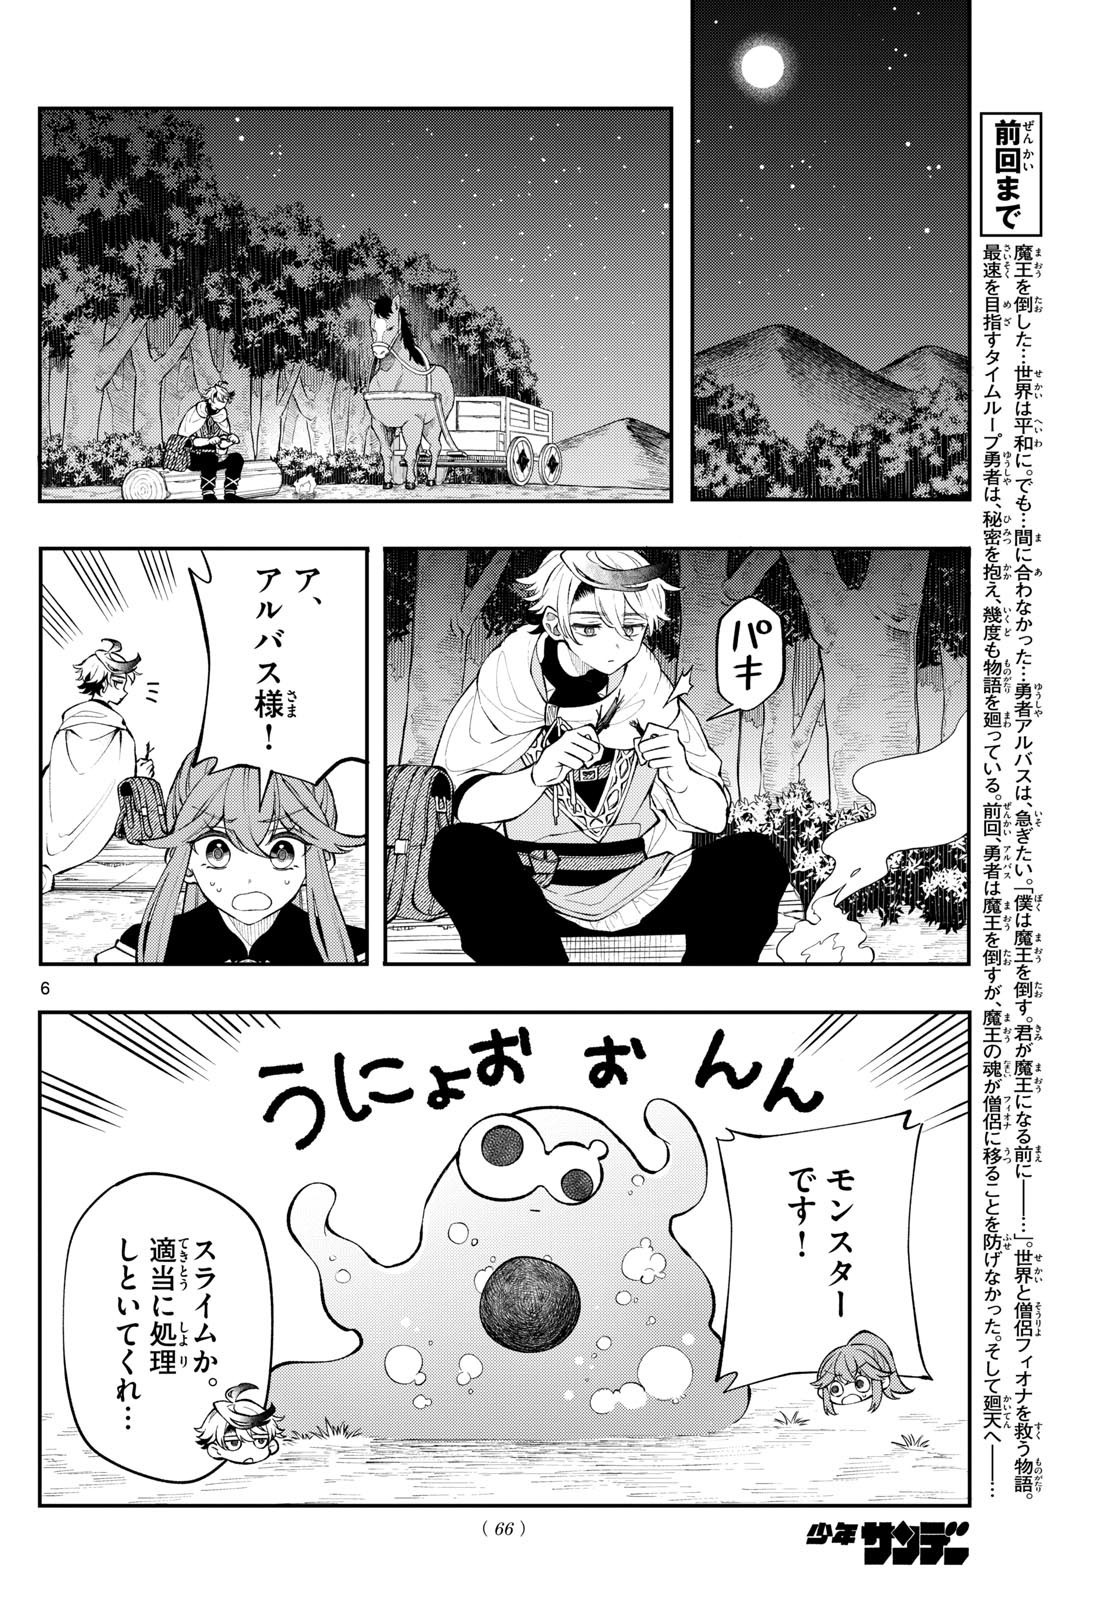 Kaiten no Albus - Chapter 9 - Page 6